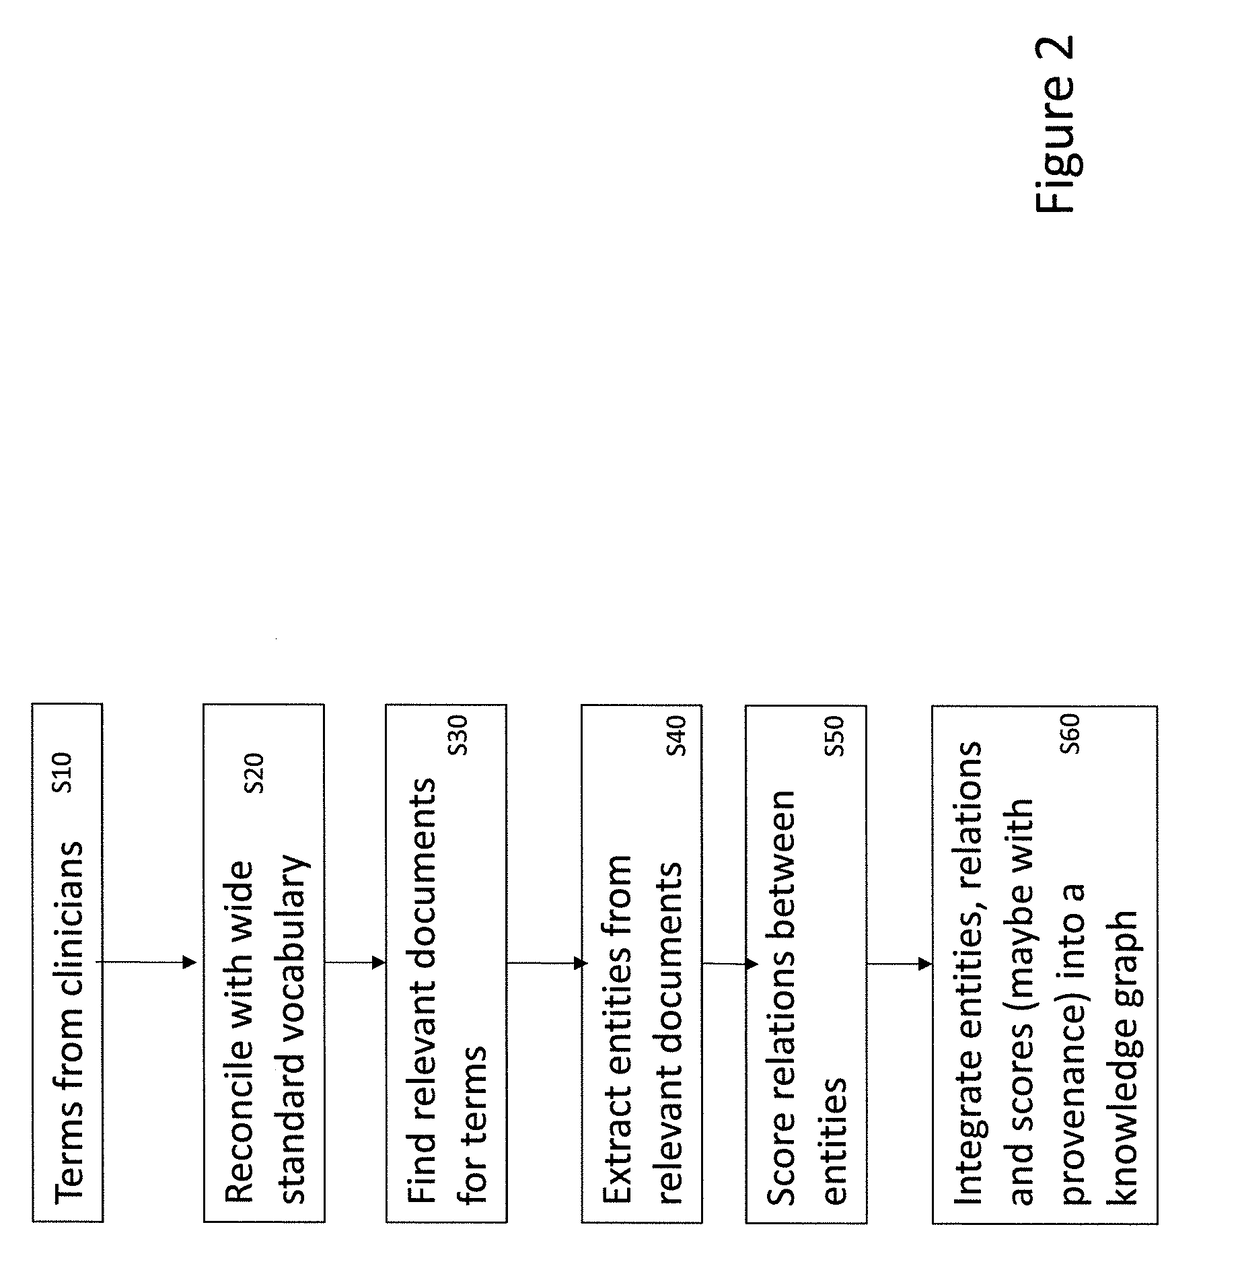 Healthcare risk extraction system and method